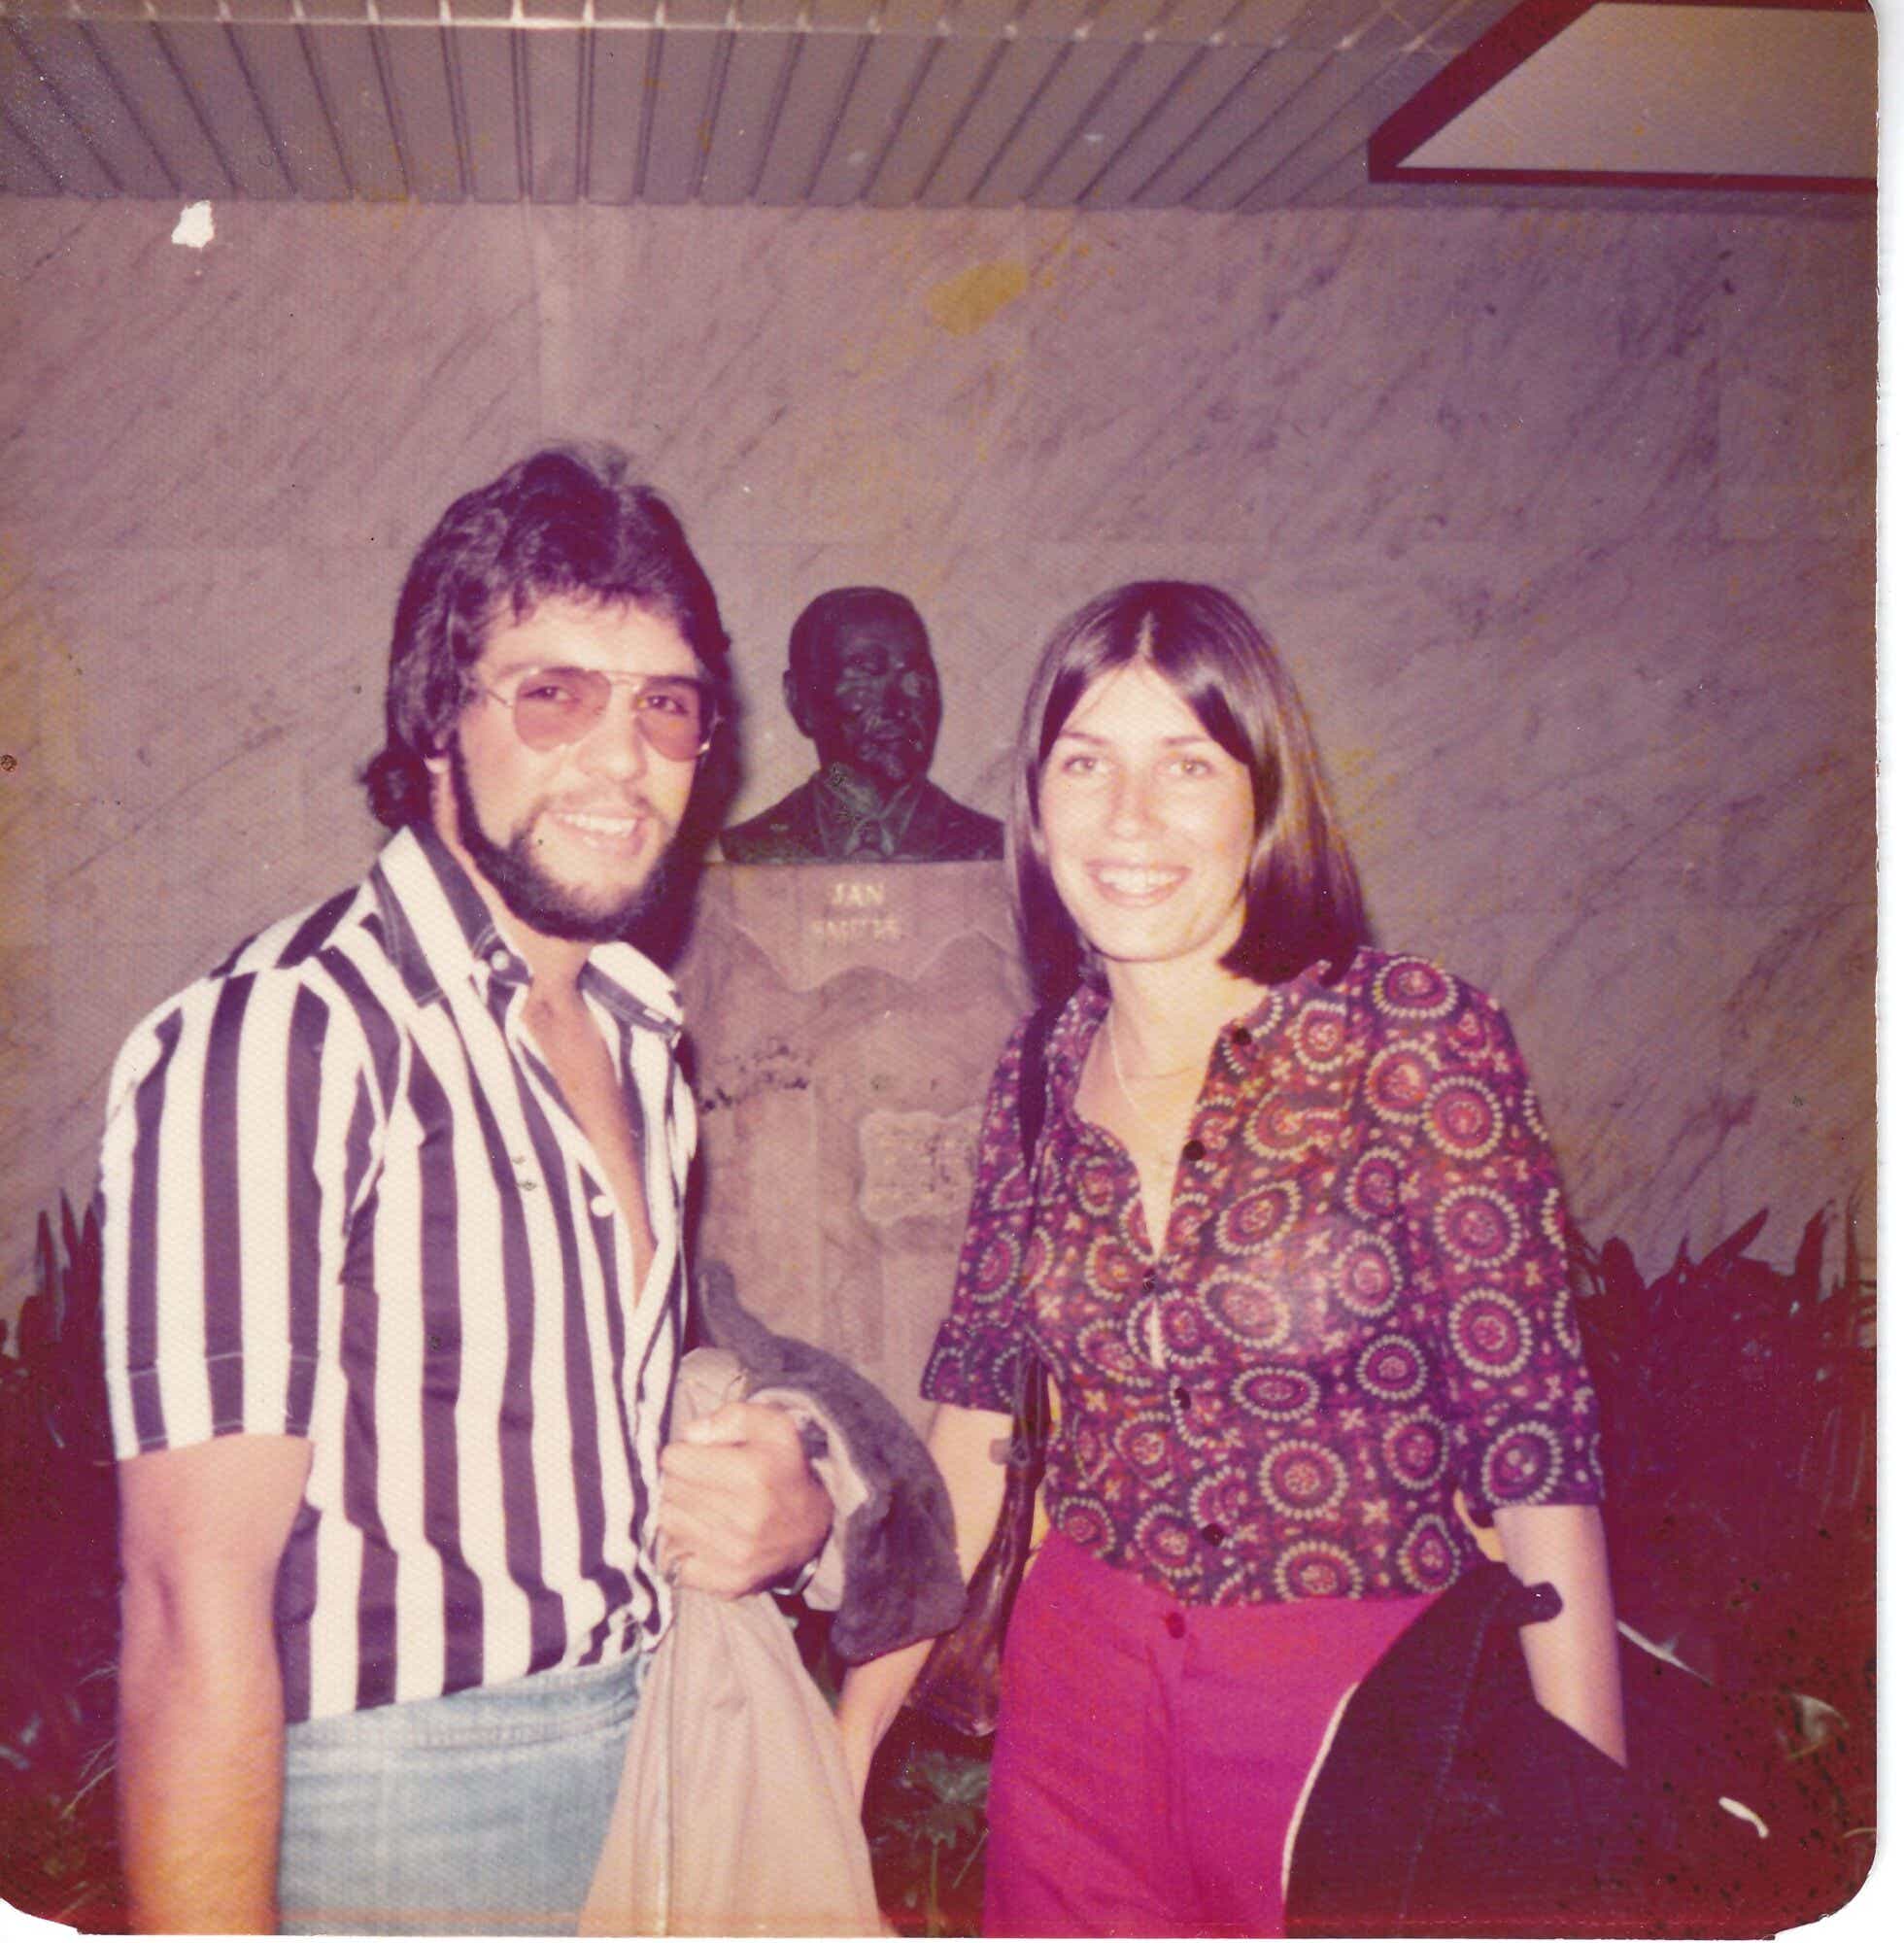 Ian and Janice at a party. in 1976